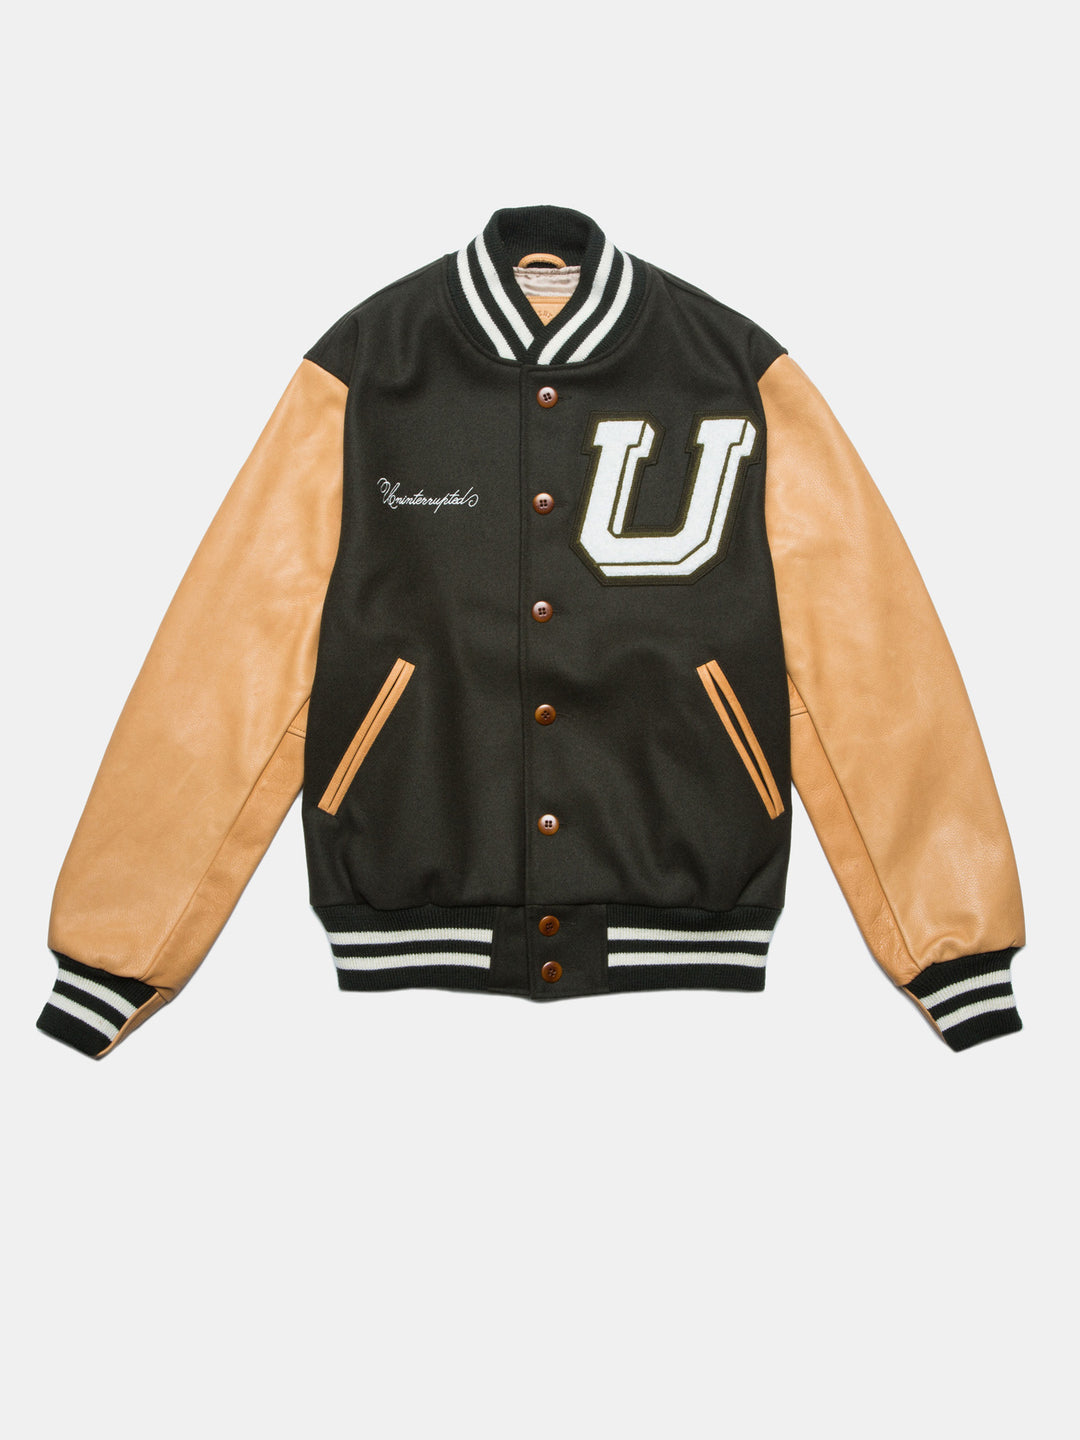 UNINTERRUPTED ALL STAR VARSITY JACKET LODEN GREEN (4458685071440) - front of green and beige jacket